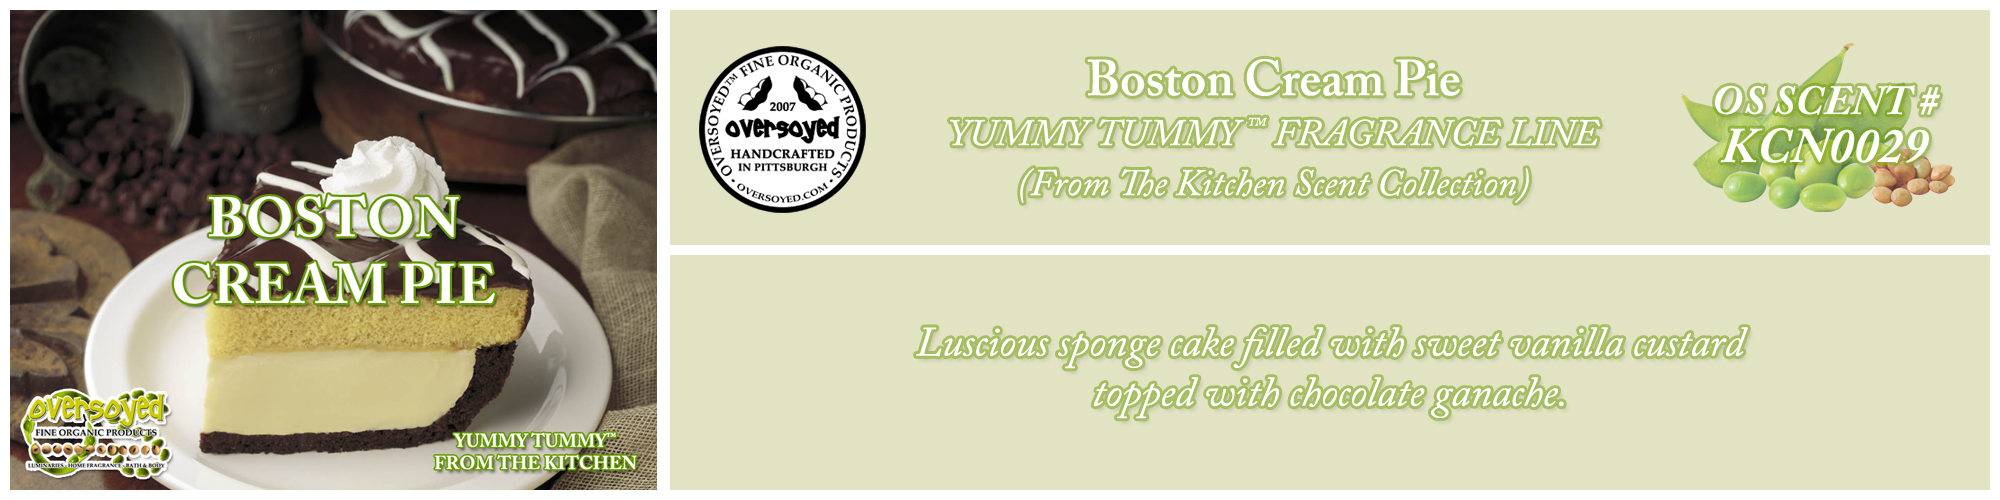 Boston Cream Pie Handcrafted Products Collection